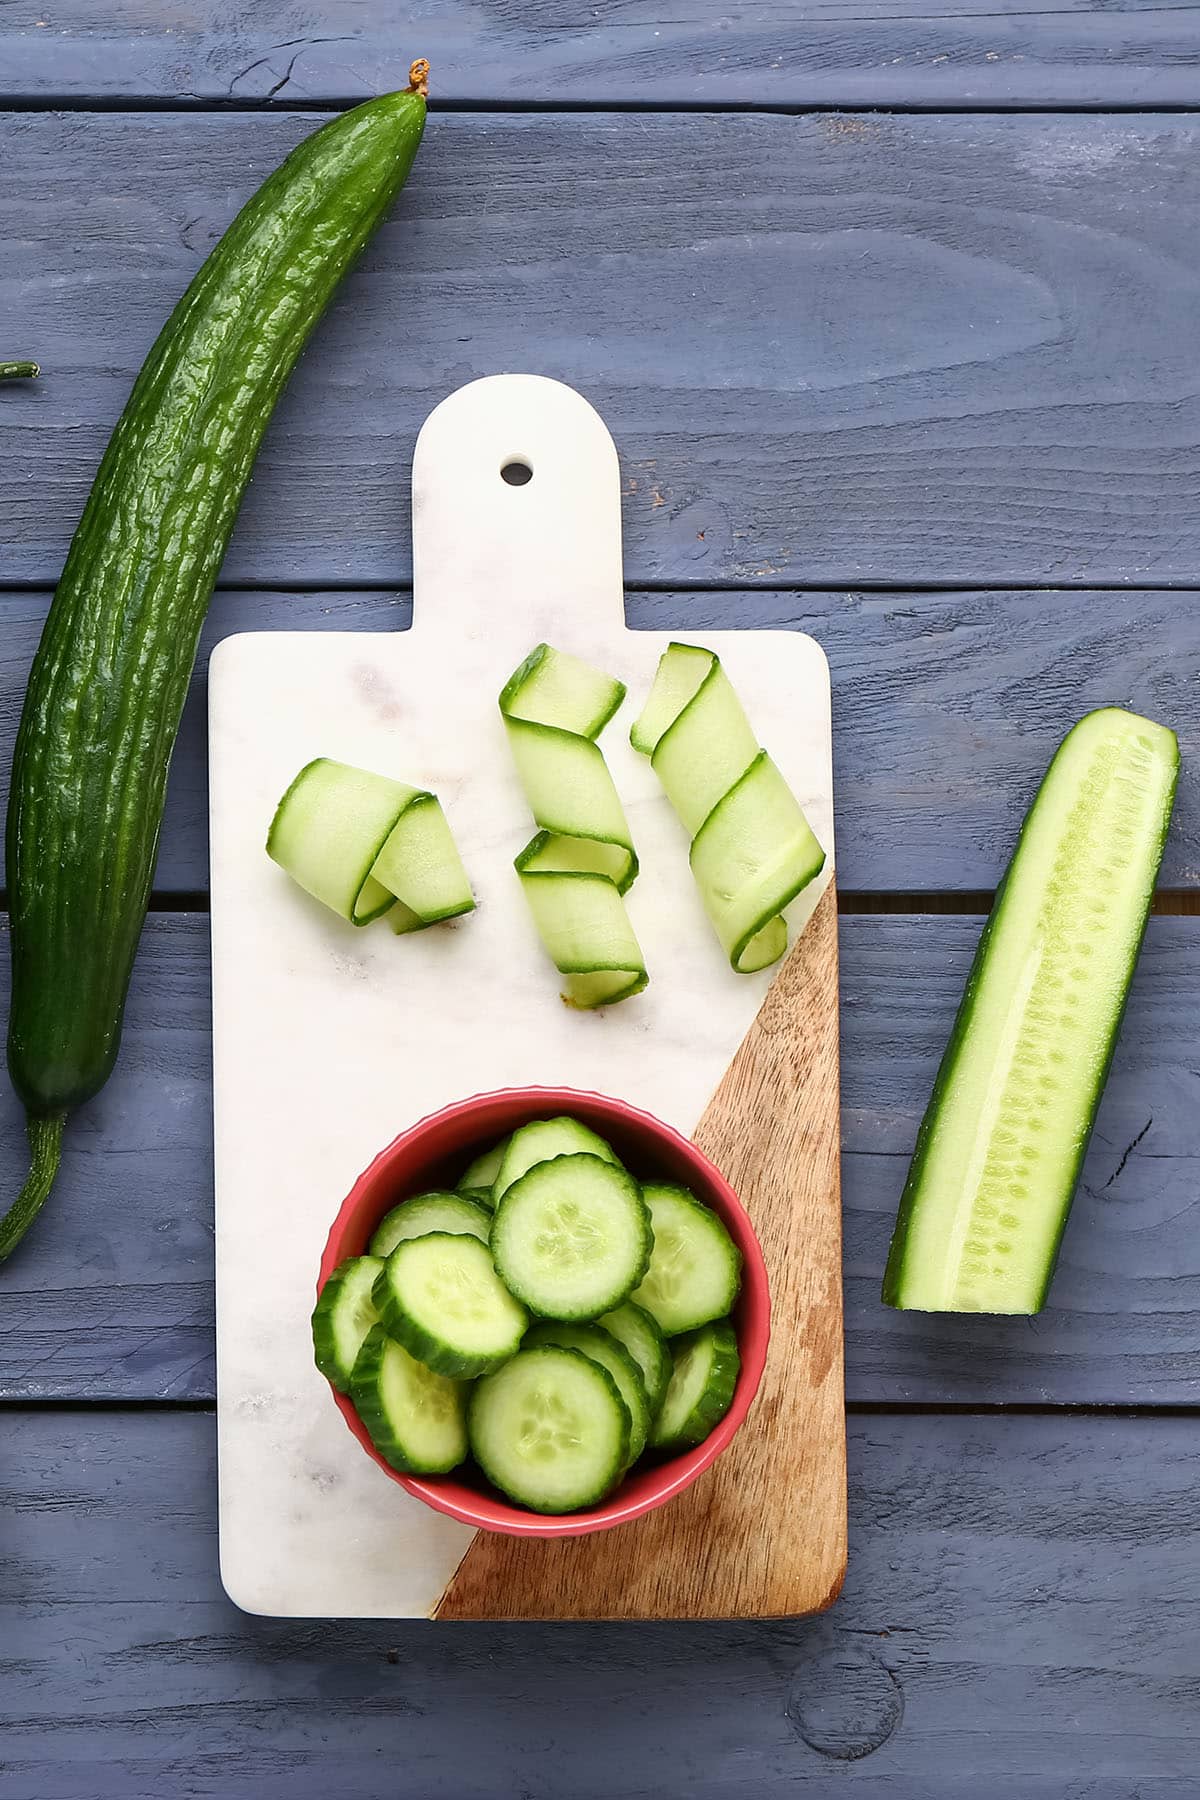 How To Drain Cucumbers For Salads and Dips